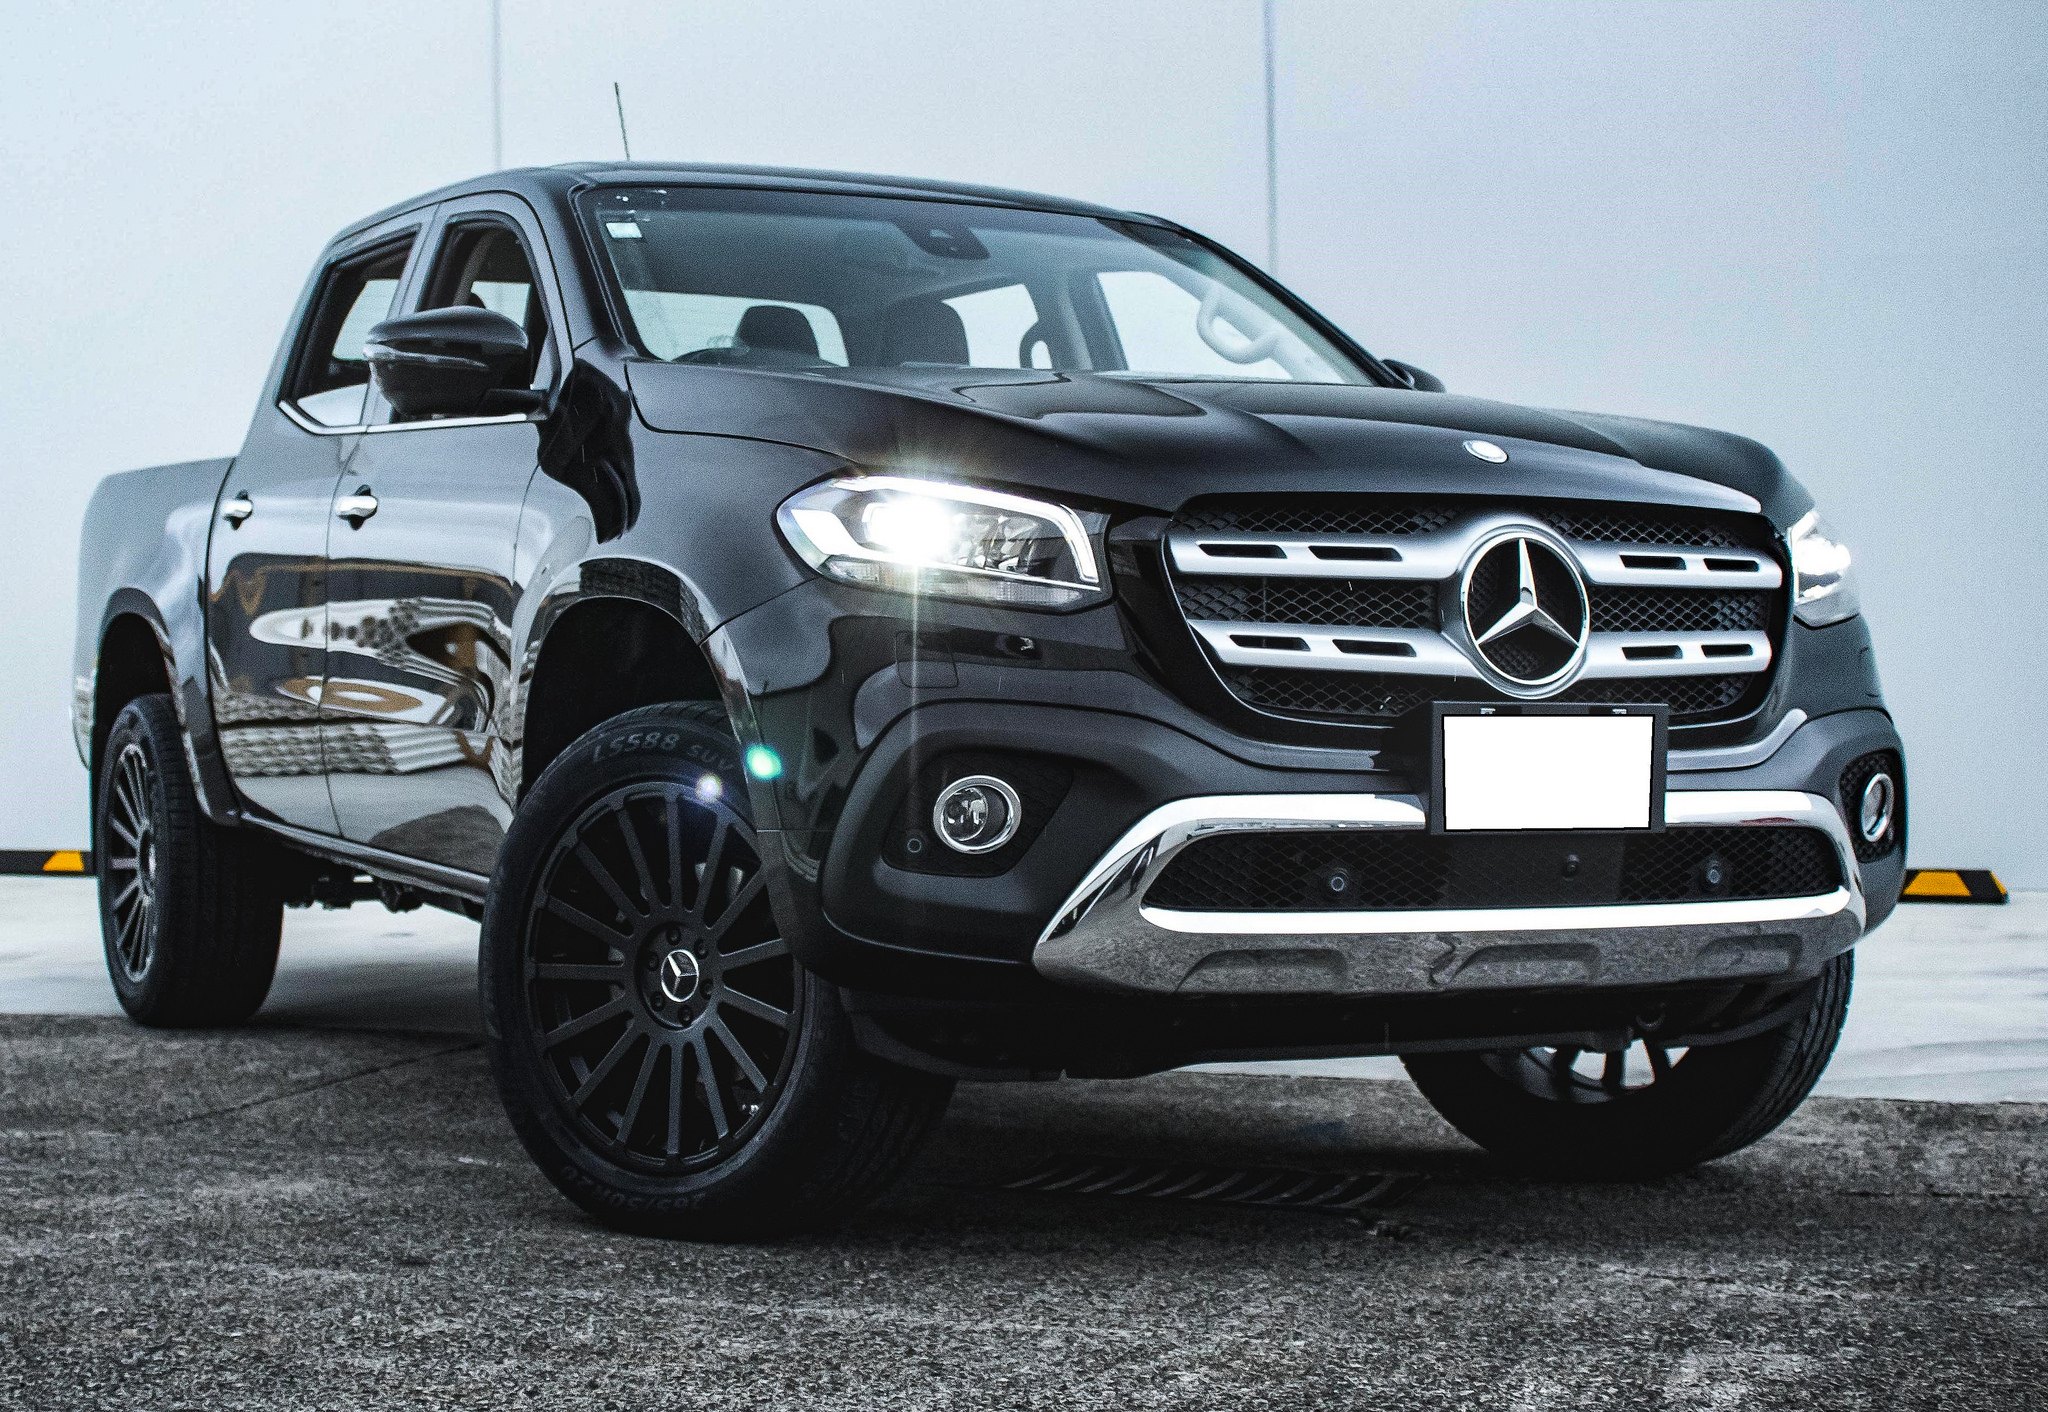 Aftermarket Chrome Grille on Black Mercedes X Class - Photo by Black Rhino Wheels